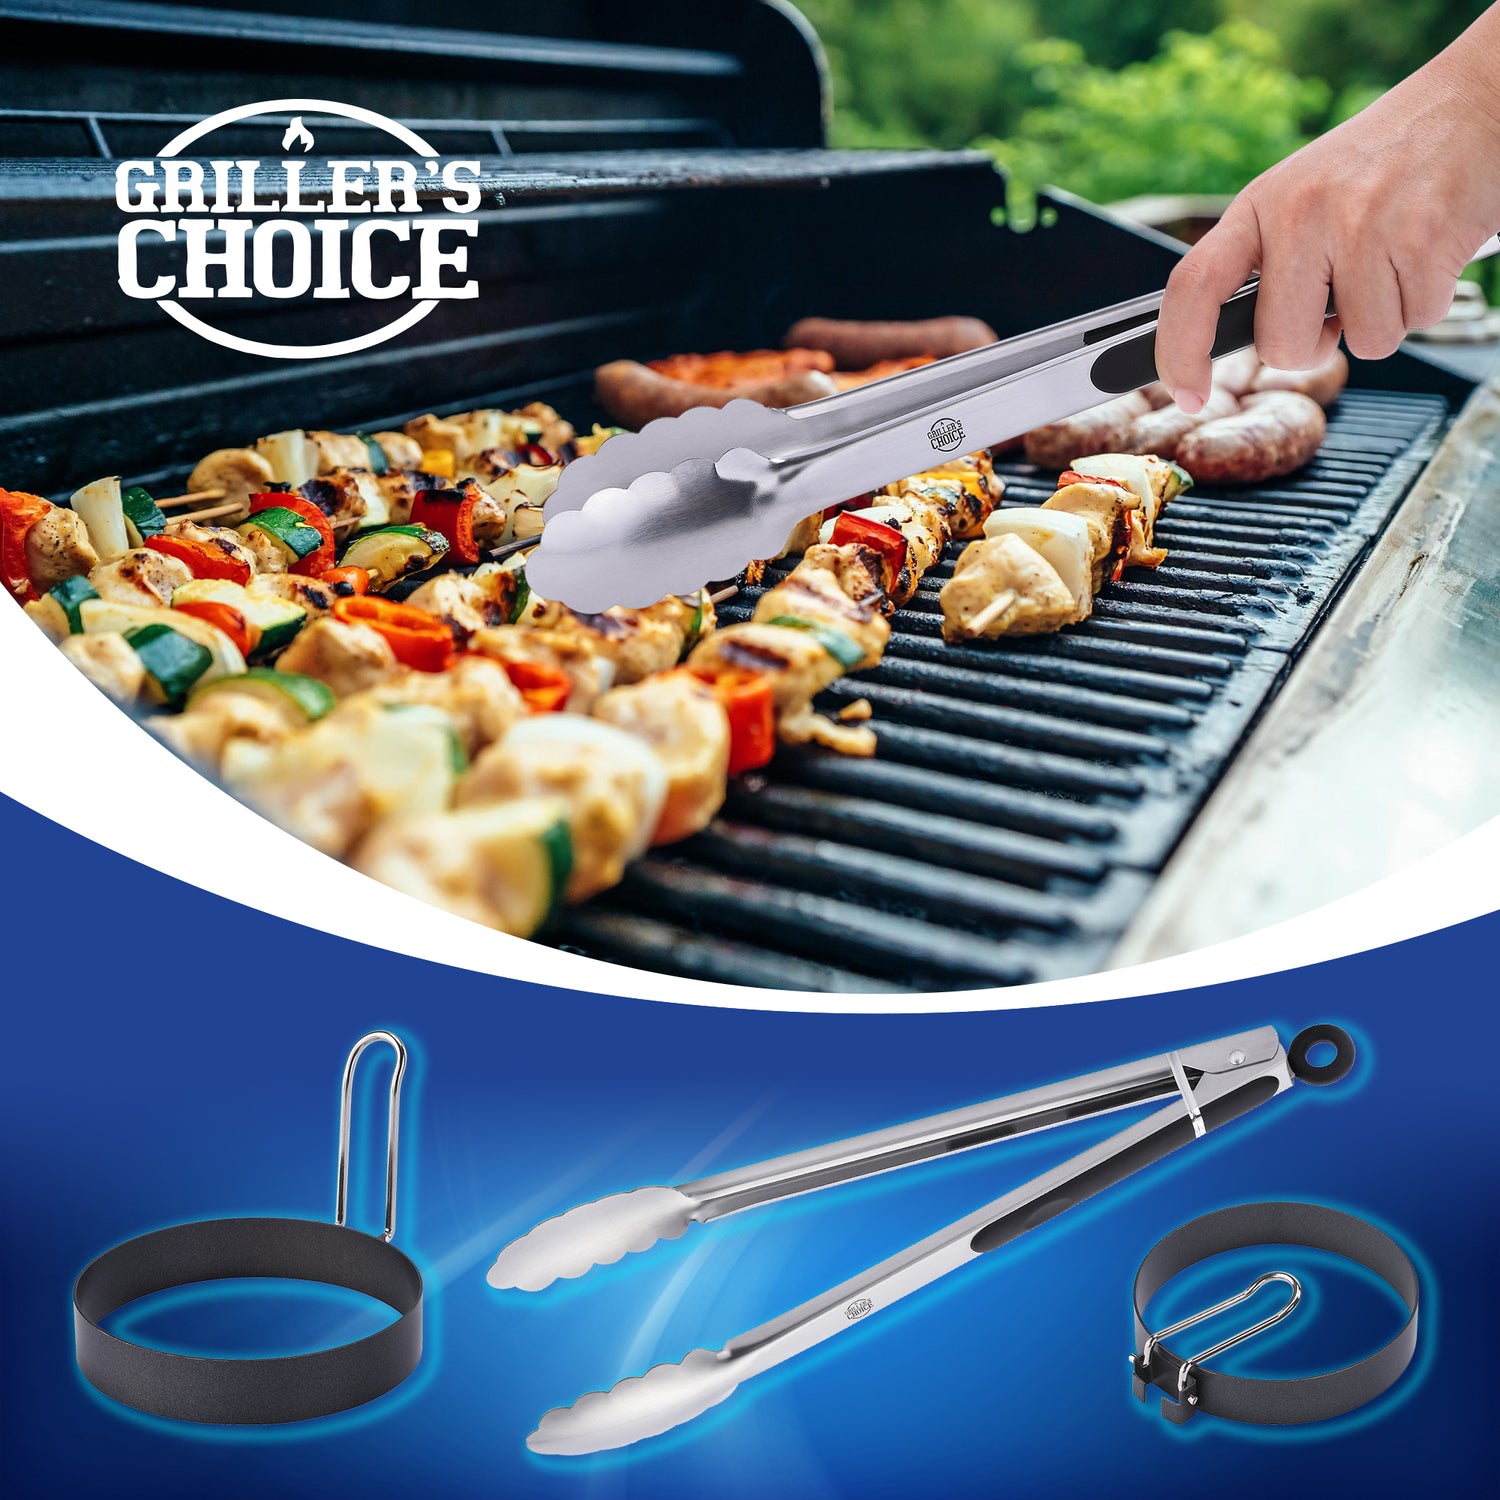 Griddle Accessories BBQ Grill Set - 9pcs Stainless Steel Barbecue